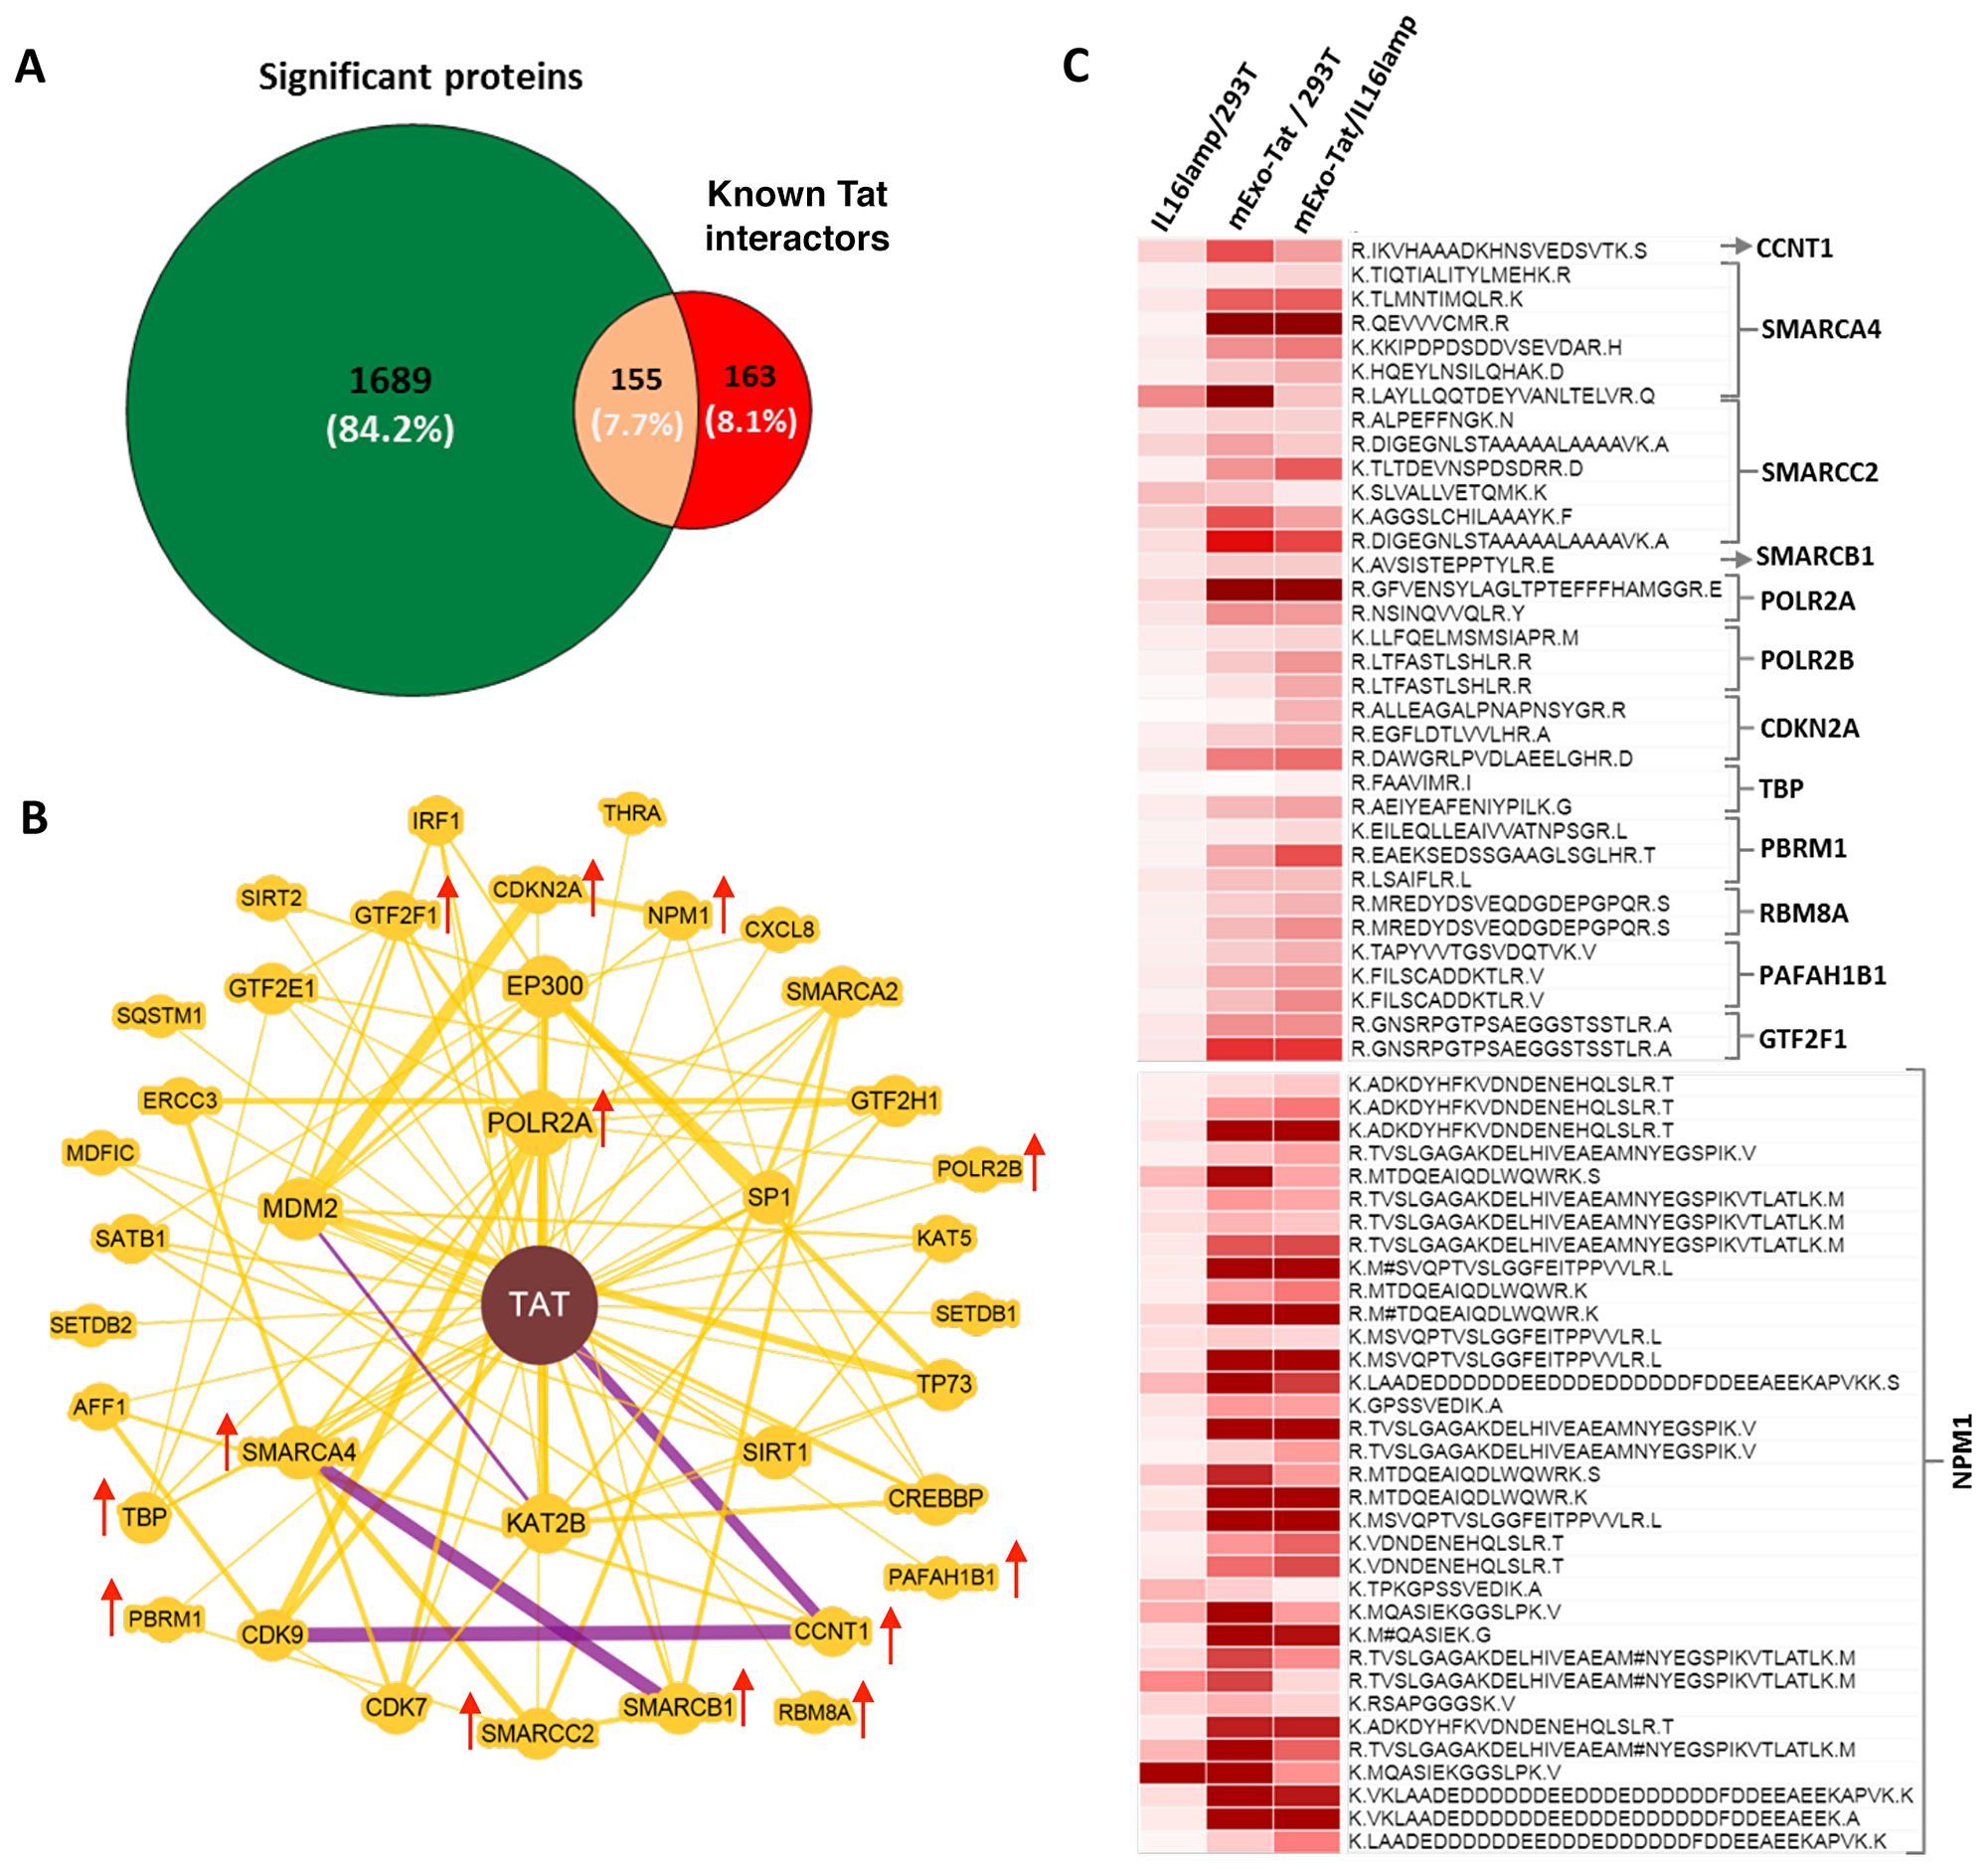 Identification and differential expression of known Tat-interactors.